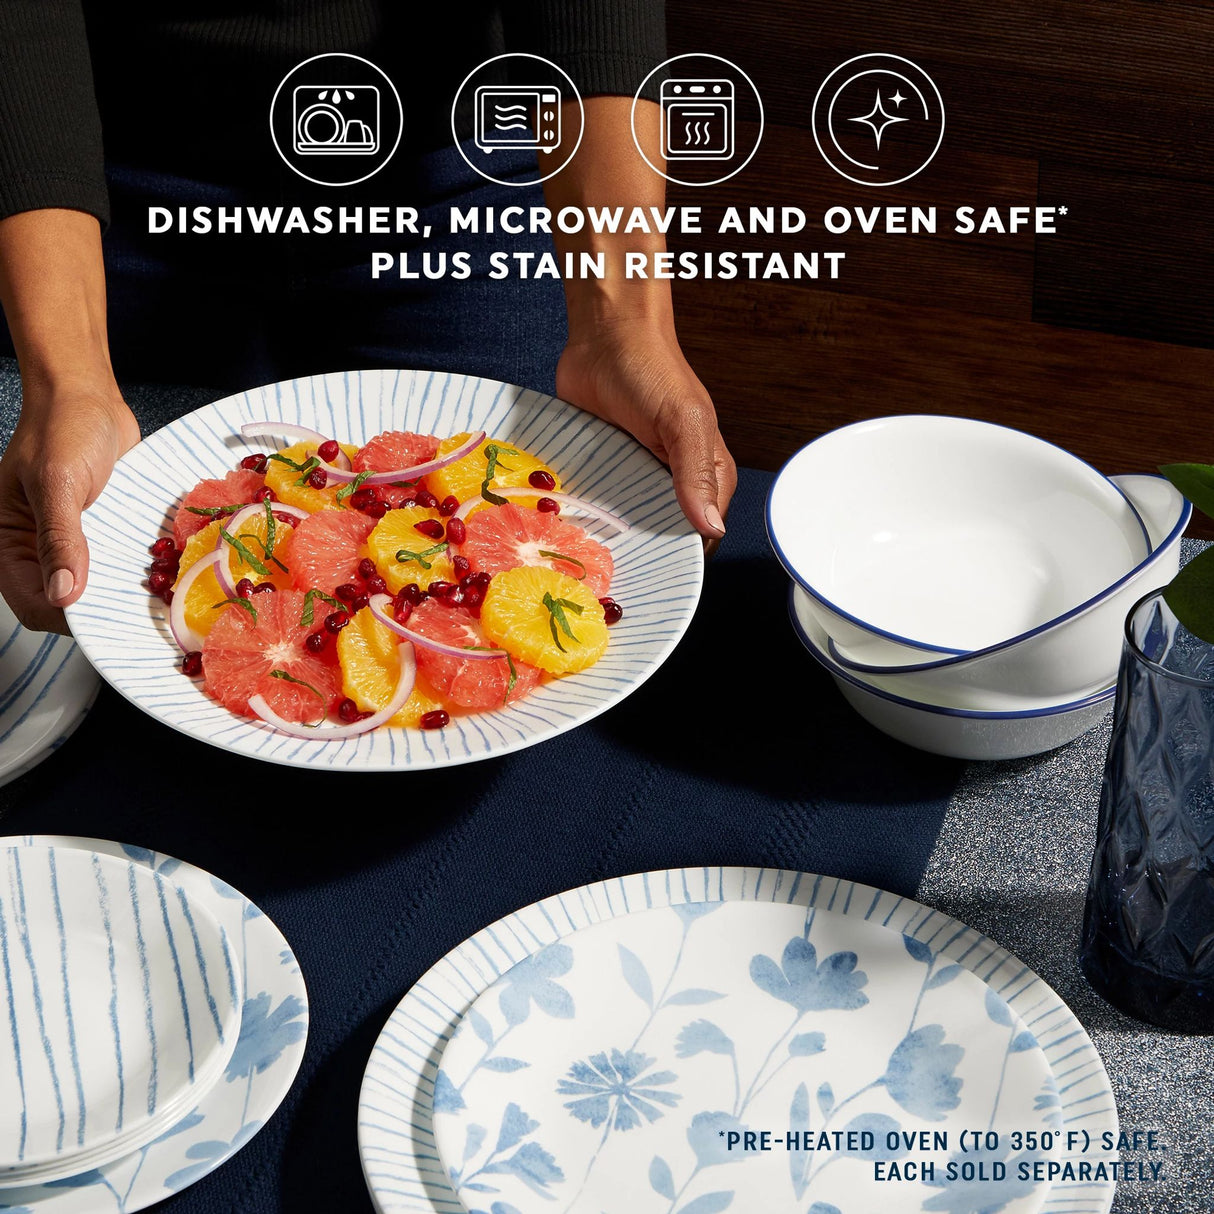  Botanical Stripes Dinnerware on tabletop with text dishwasher, microwave, and oven safe plus stain resistant